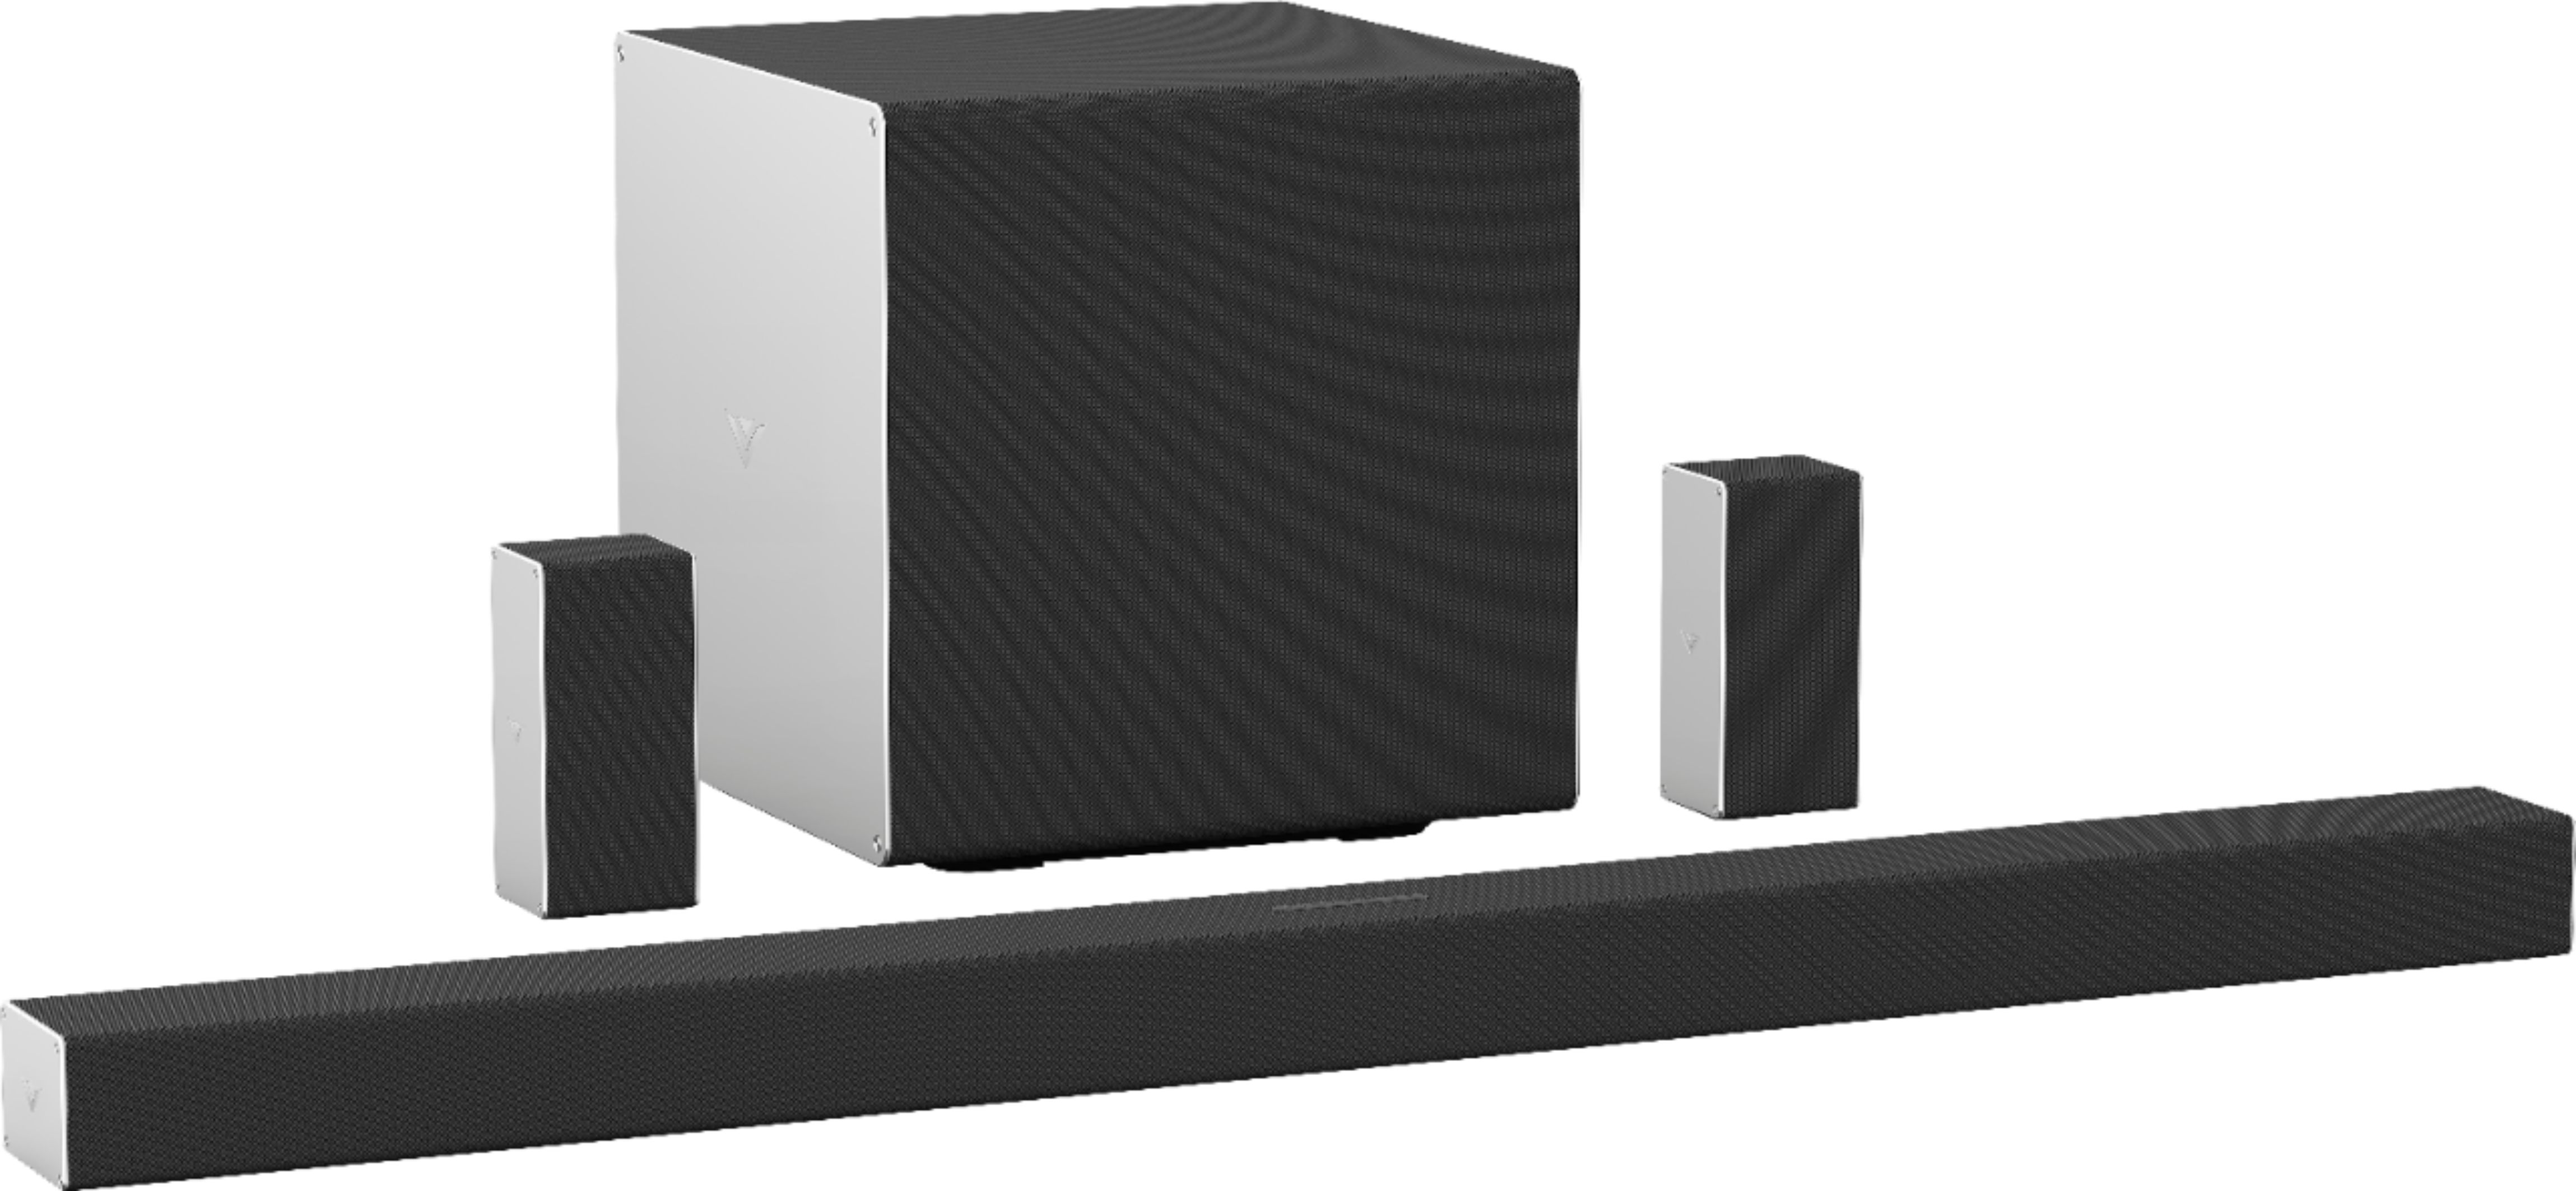 VIZIO 5.1.4-Channel Soundbar with Wireless Subwoofer, Dolby Atmos and Voice  Assistant Black SB46514-F6 - Best Buy